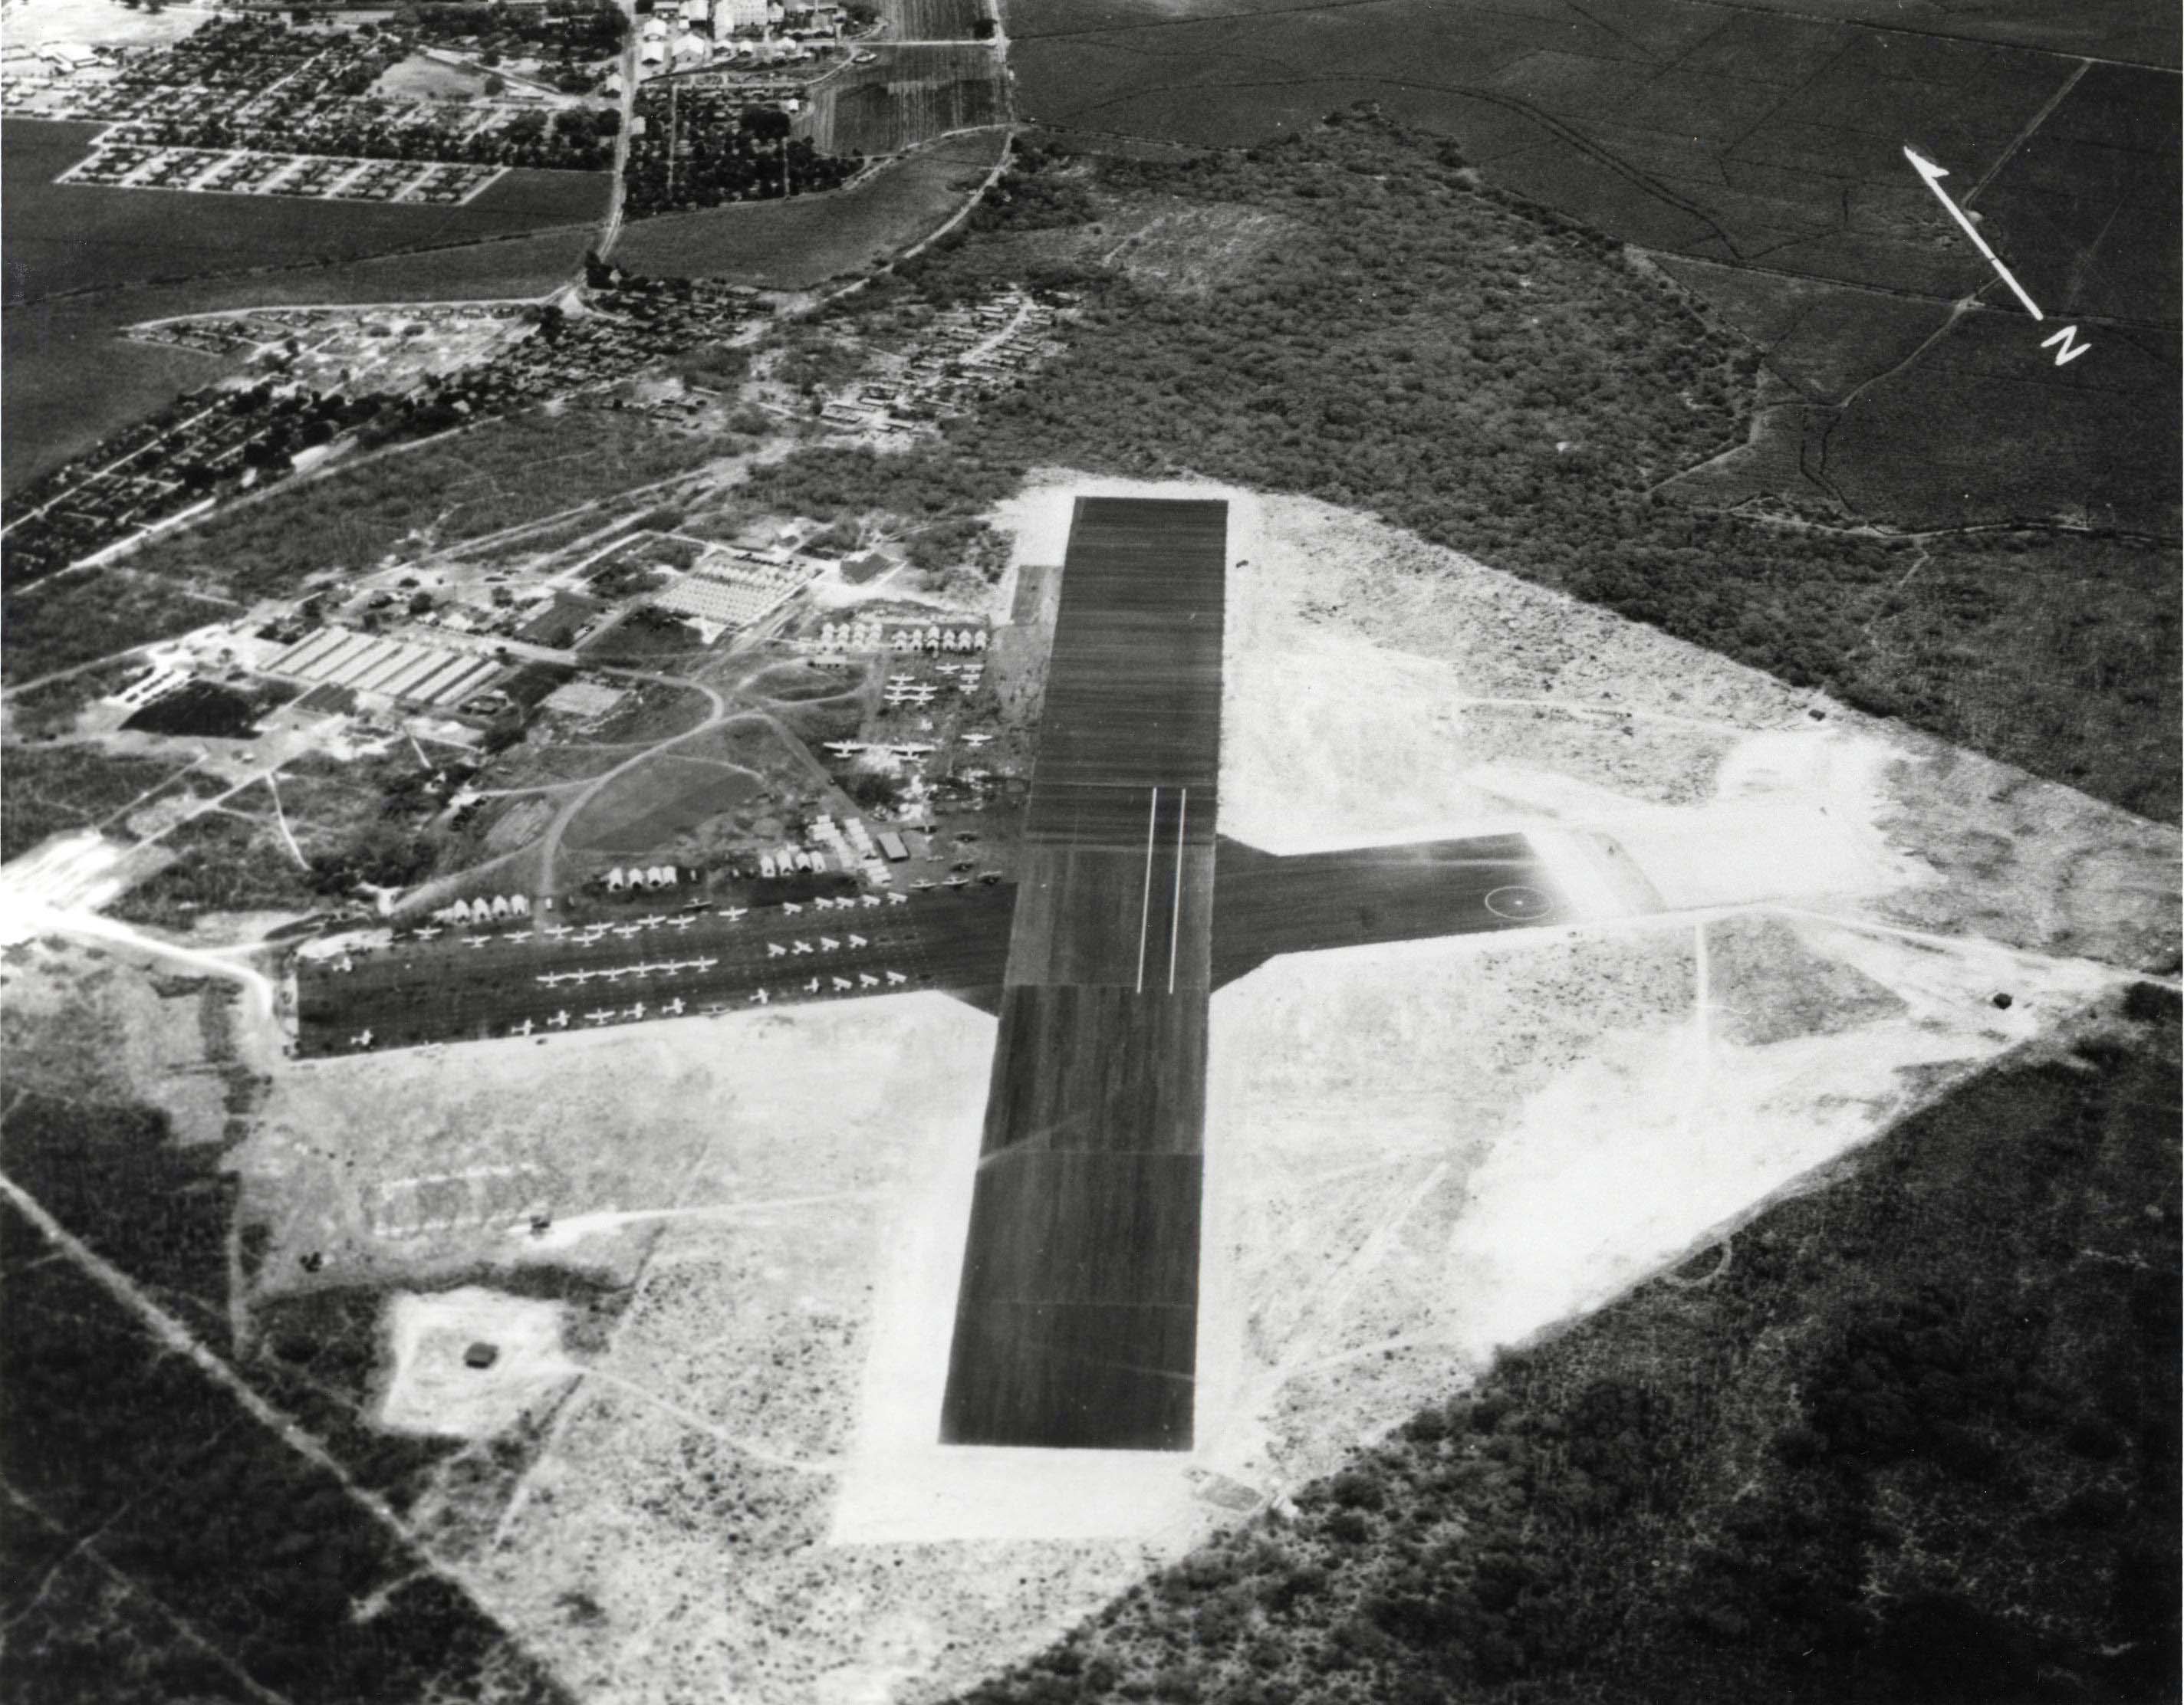 Aerial view of Marine Corps Air Station Ewa, Oahu, Hawaii, Jul 29, 1941. The lines painted on the runway were to approximate a carrier’s flight deck.